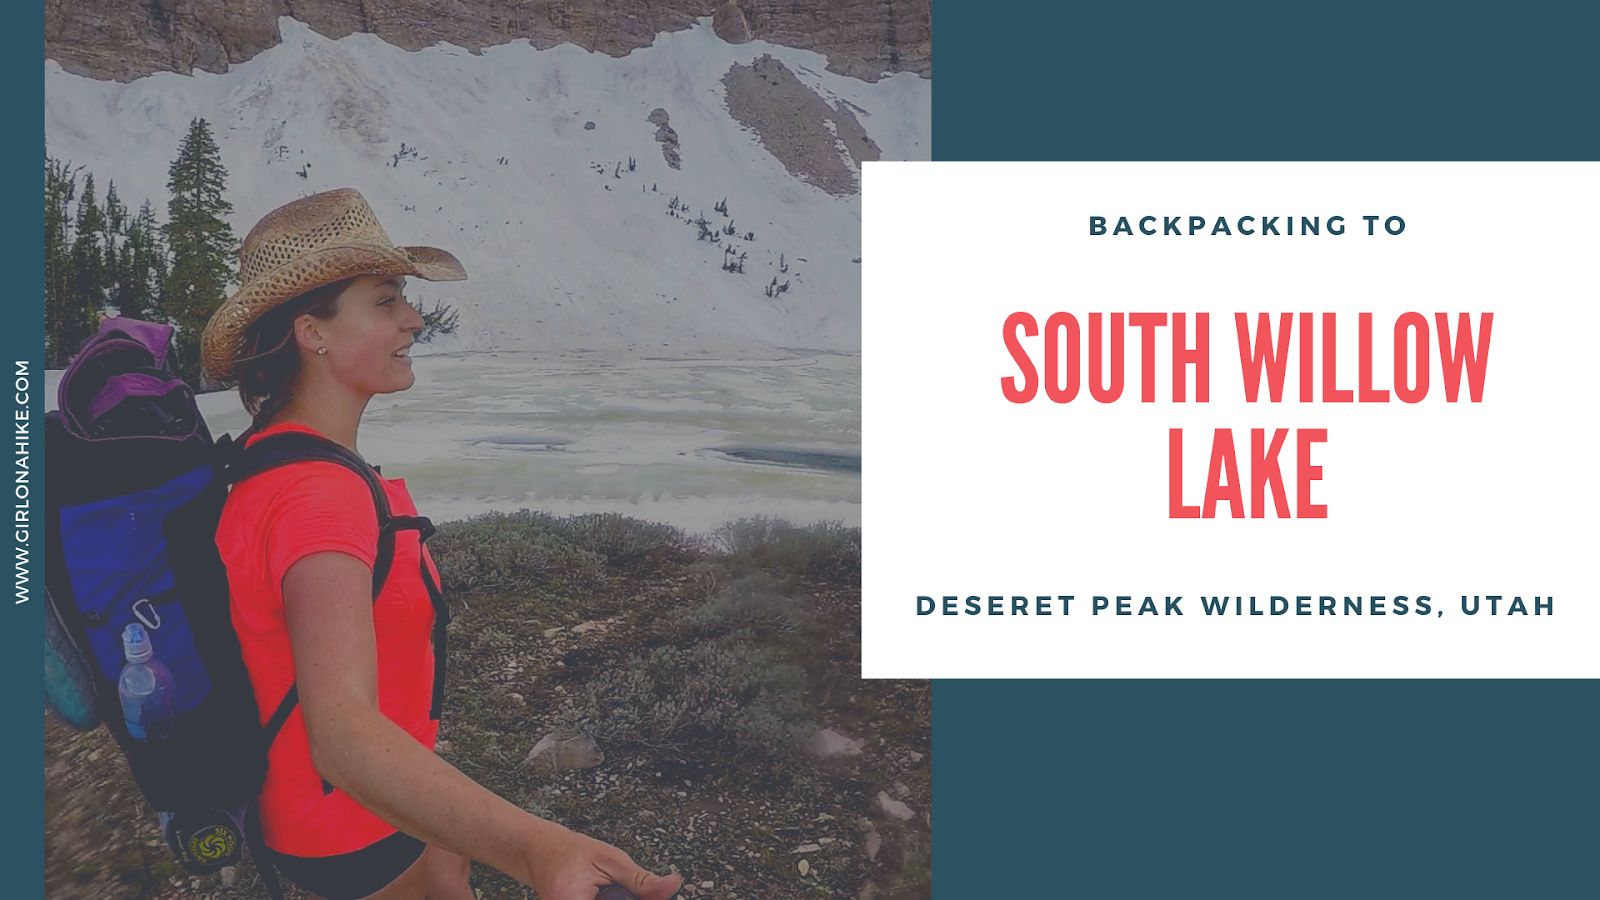 Backpacking to South Willow Lake